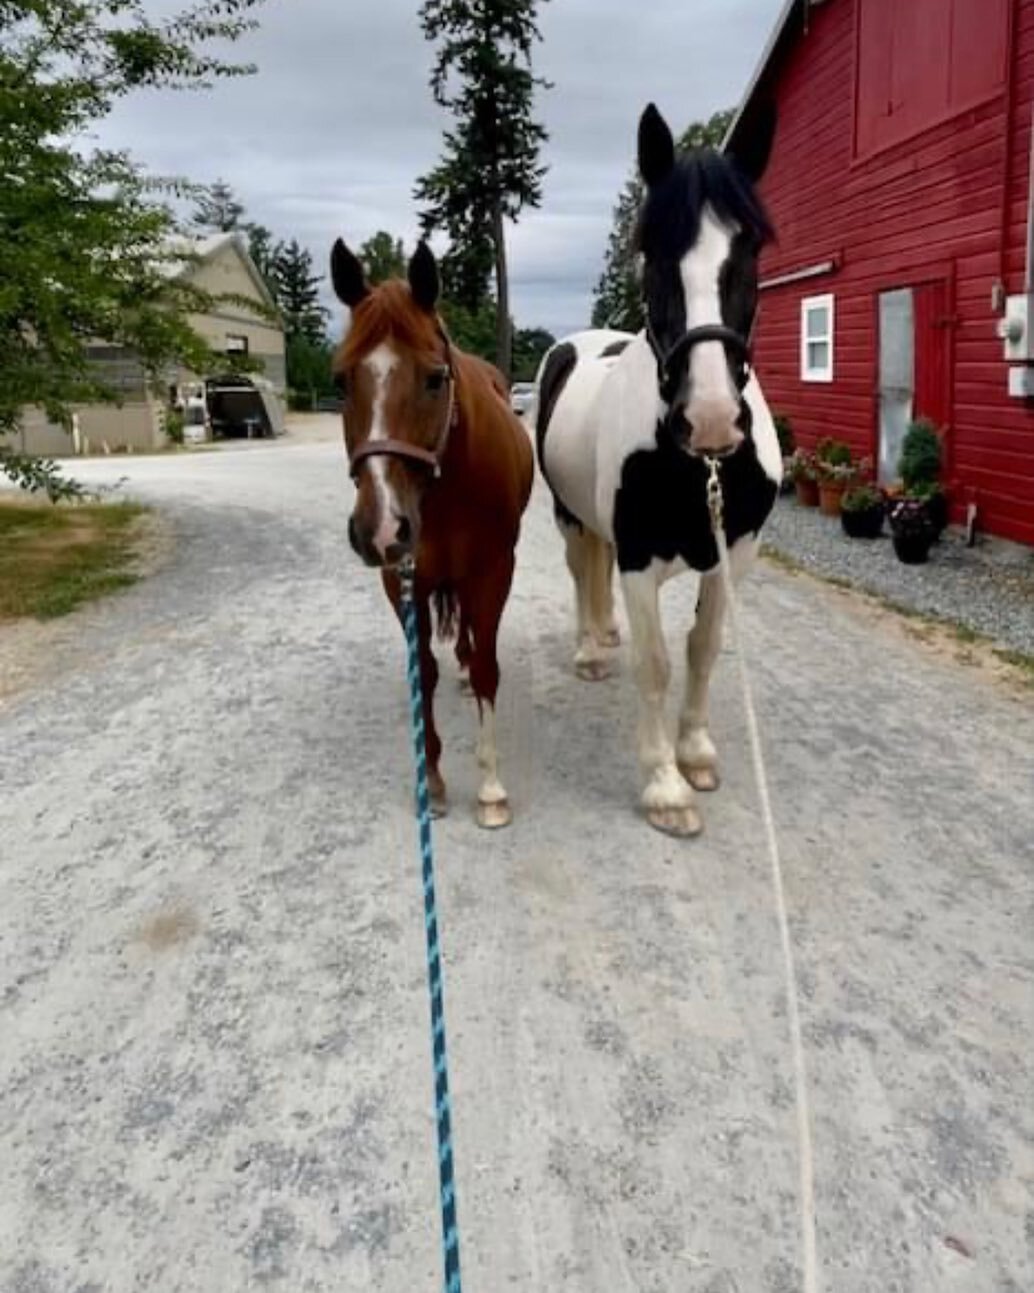 Teo and Scoot (two of our tallest horses) - about to get some love from our Equine Staff. 

Can you guess their heights!? Comment below to guess!

#gelding #chestnut #spotteddraft #tall #gentlegiant #handsome #horses #equinetherapy #aldergrove